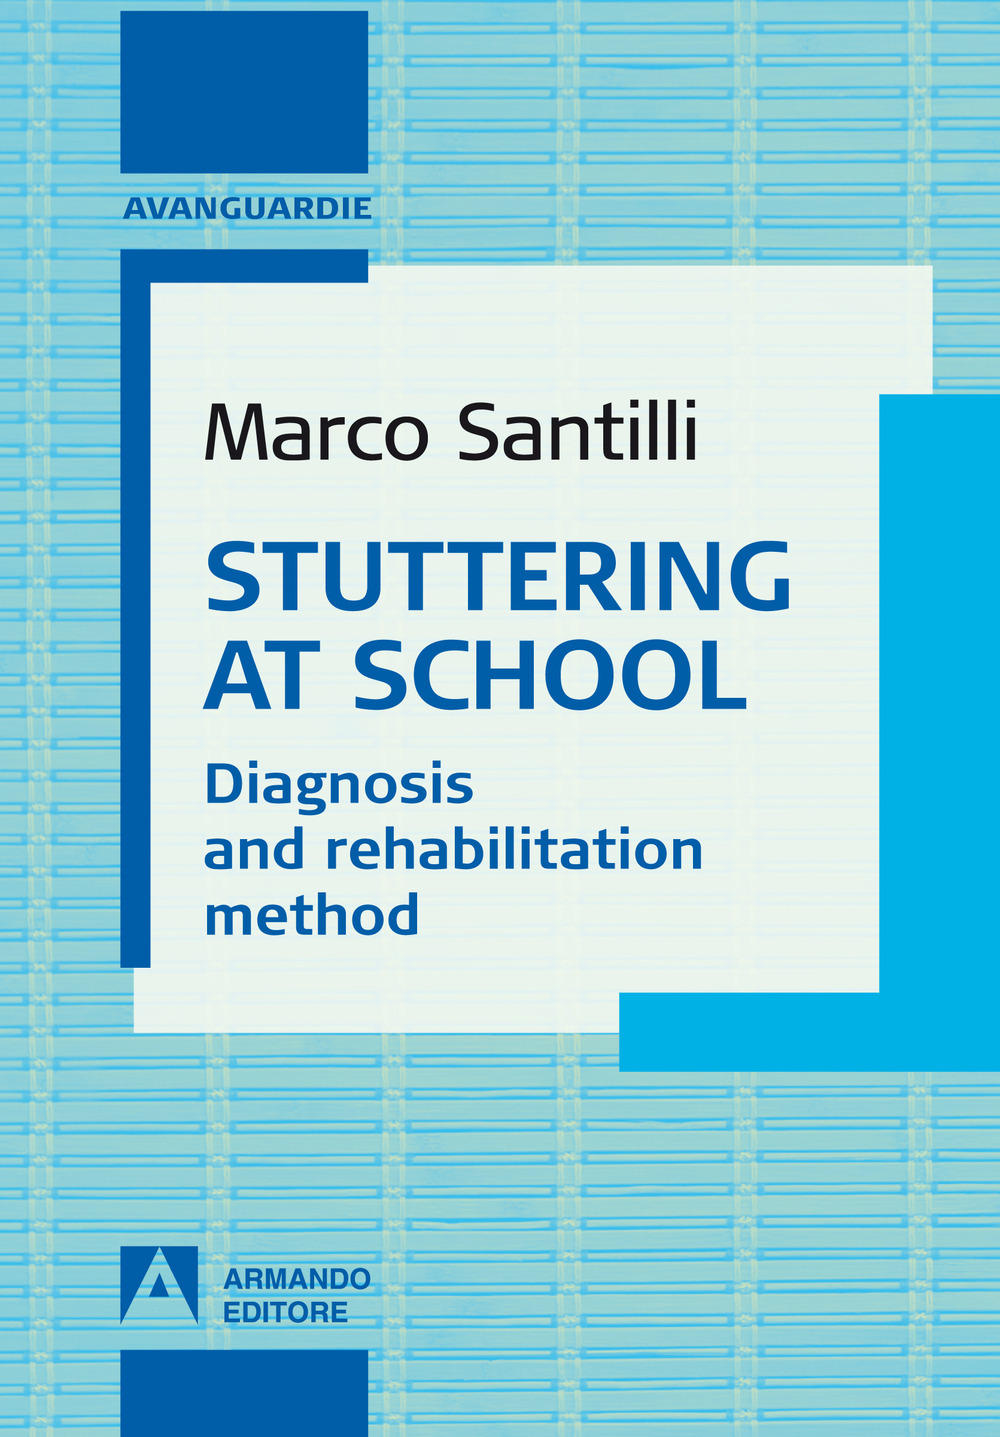 Stuttering at school. Diagnosis and rehabilitation method